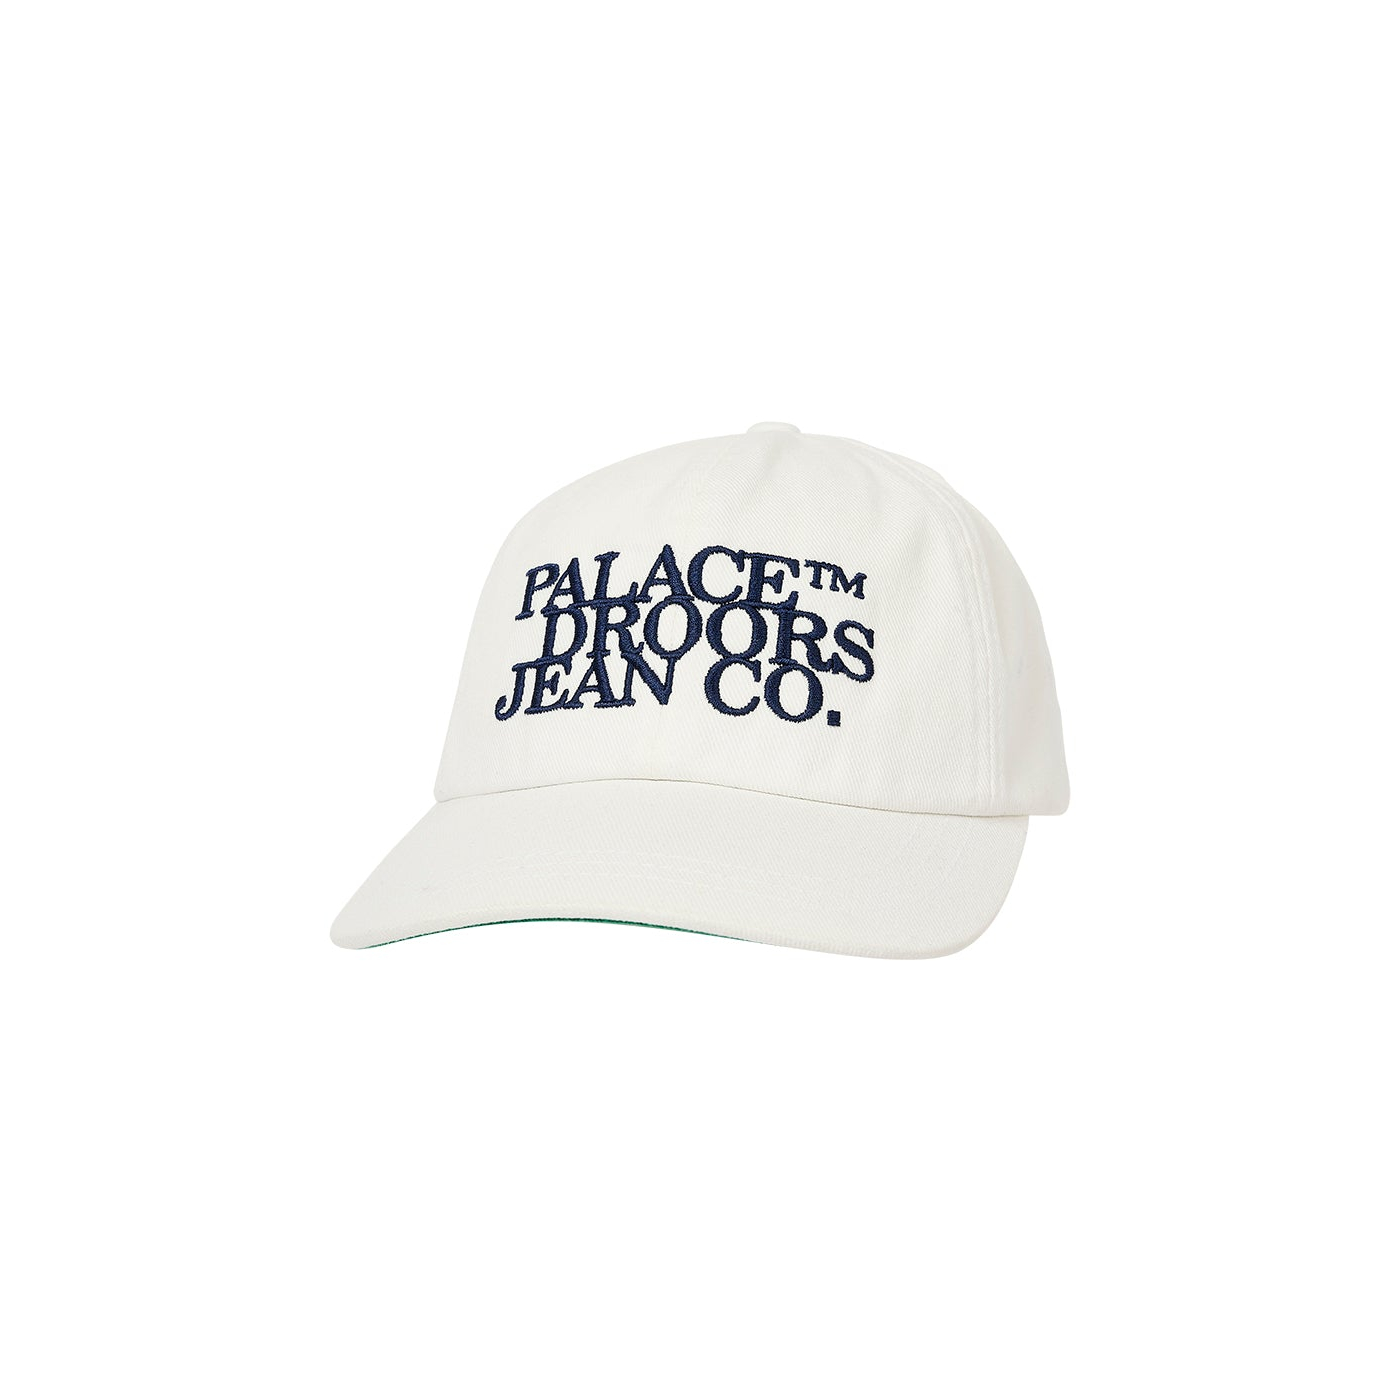 Thumbnail PALACE DROORS 6-PANEL WHITE one color